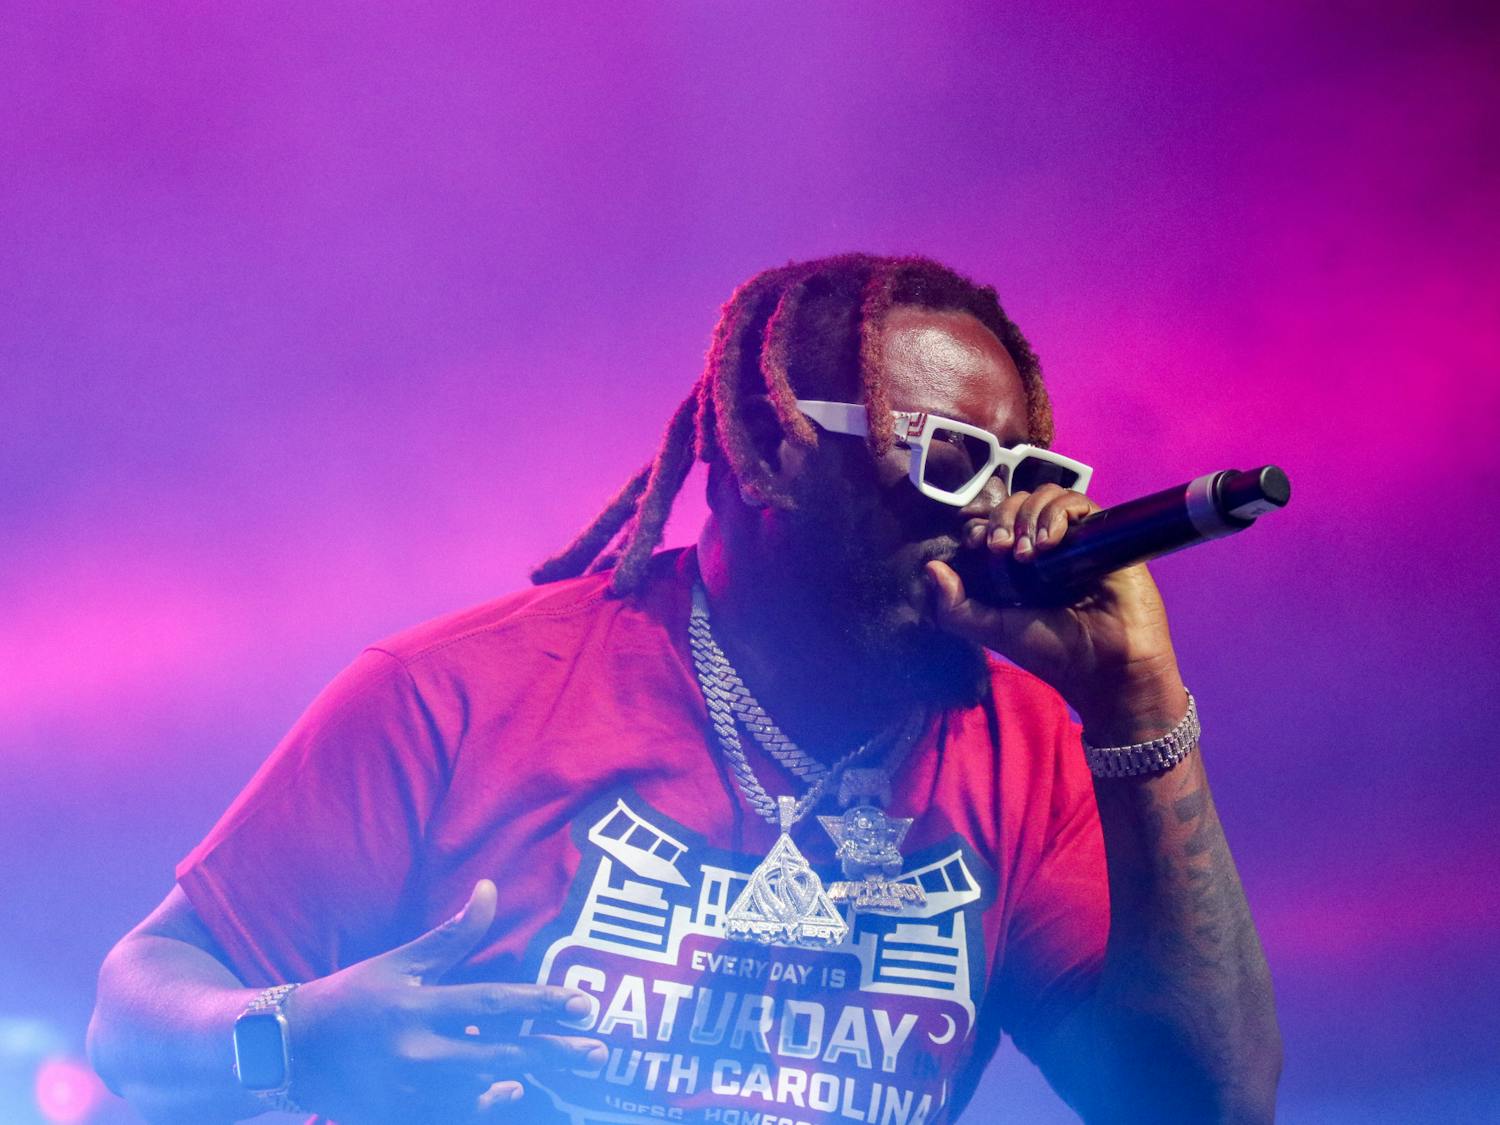 T-Pain performing at Cockstock on Oct. 21, 2022. His performance featured vivid lights and a larger-than-life stage presence that kept the audience engaged.&nbsp;